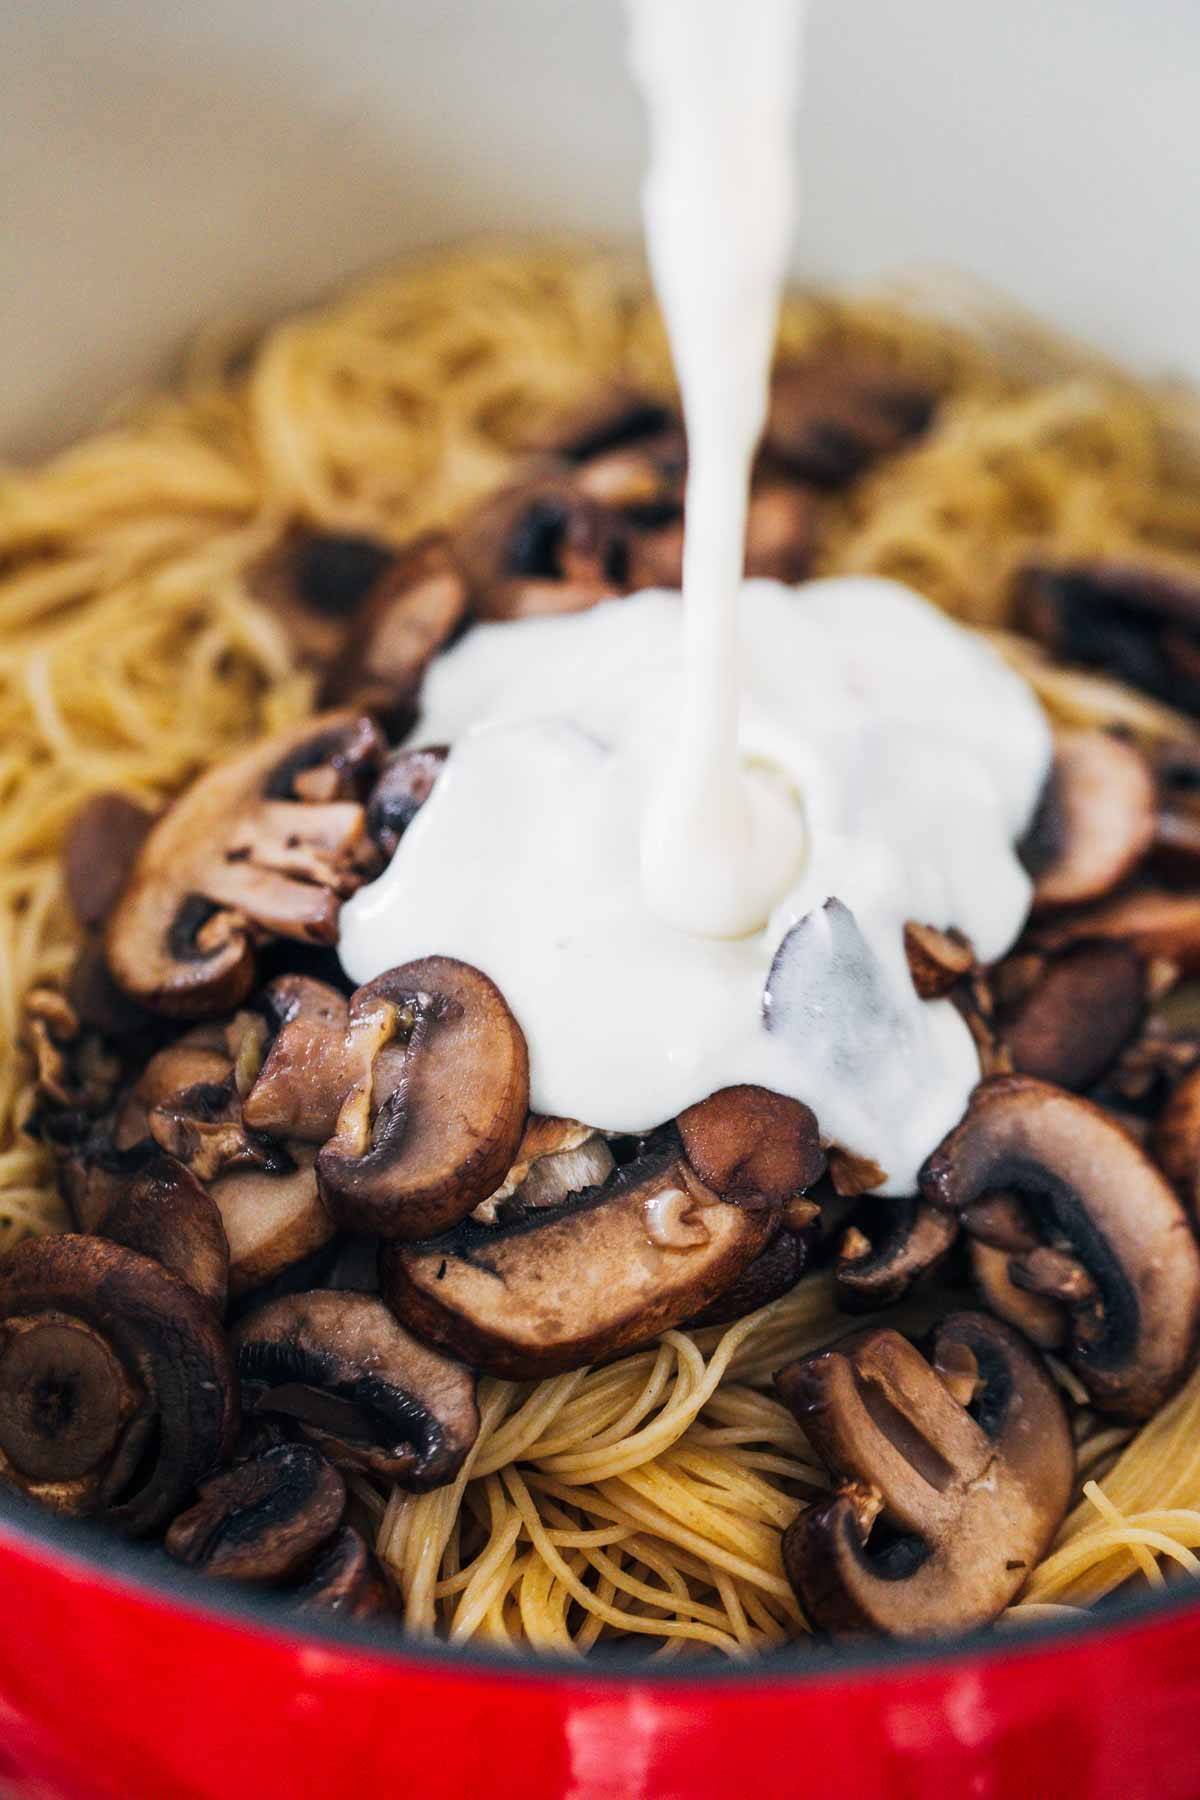 Cream on mushrooms and noodles.